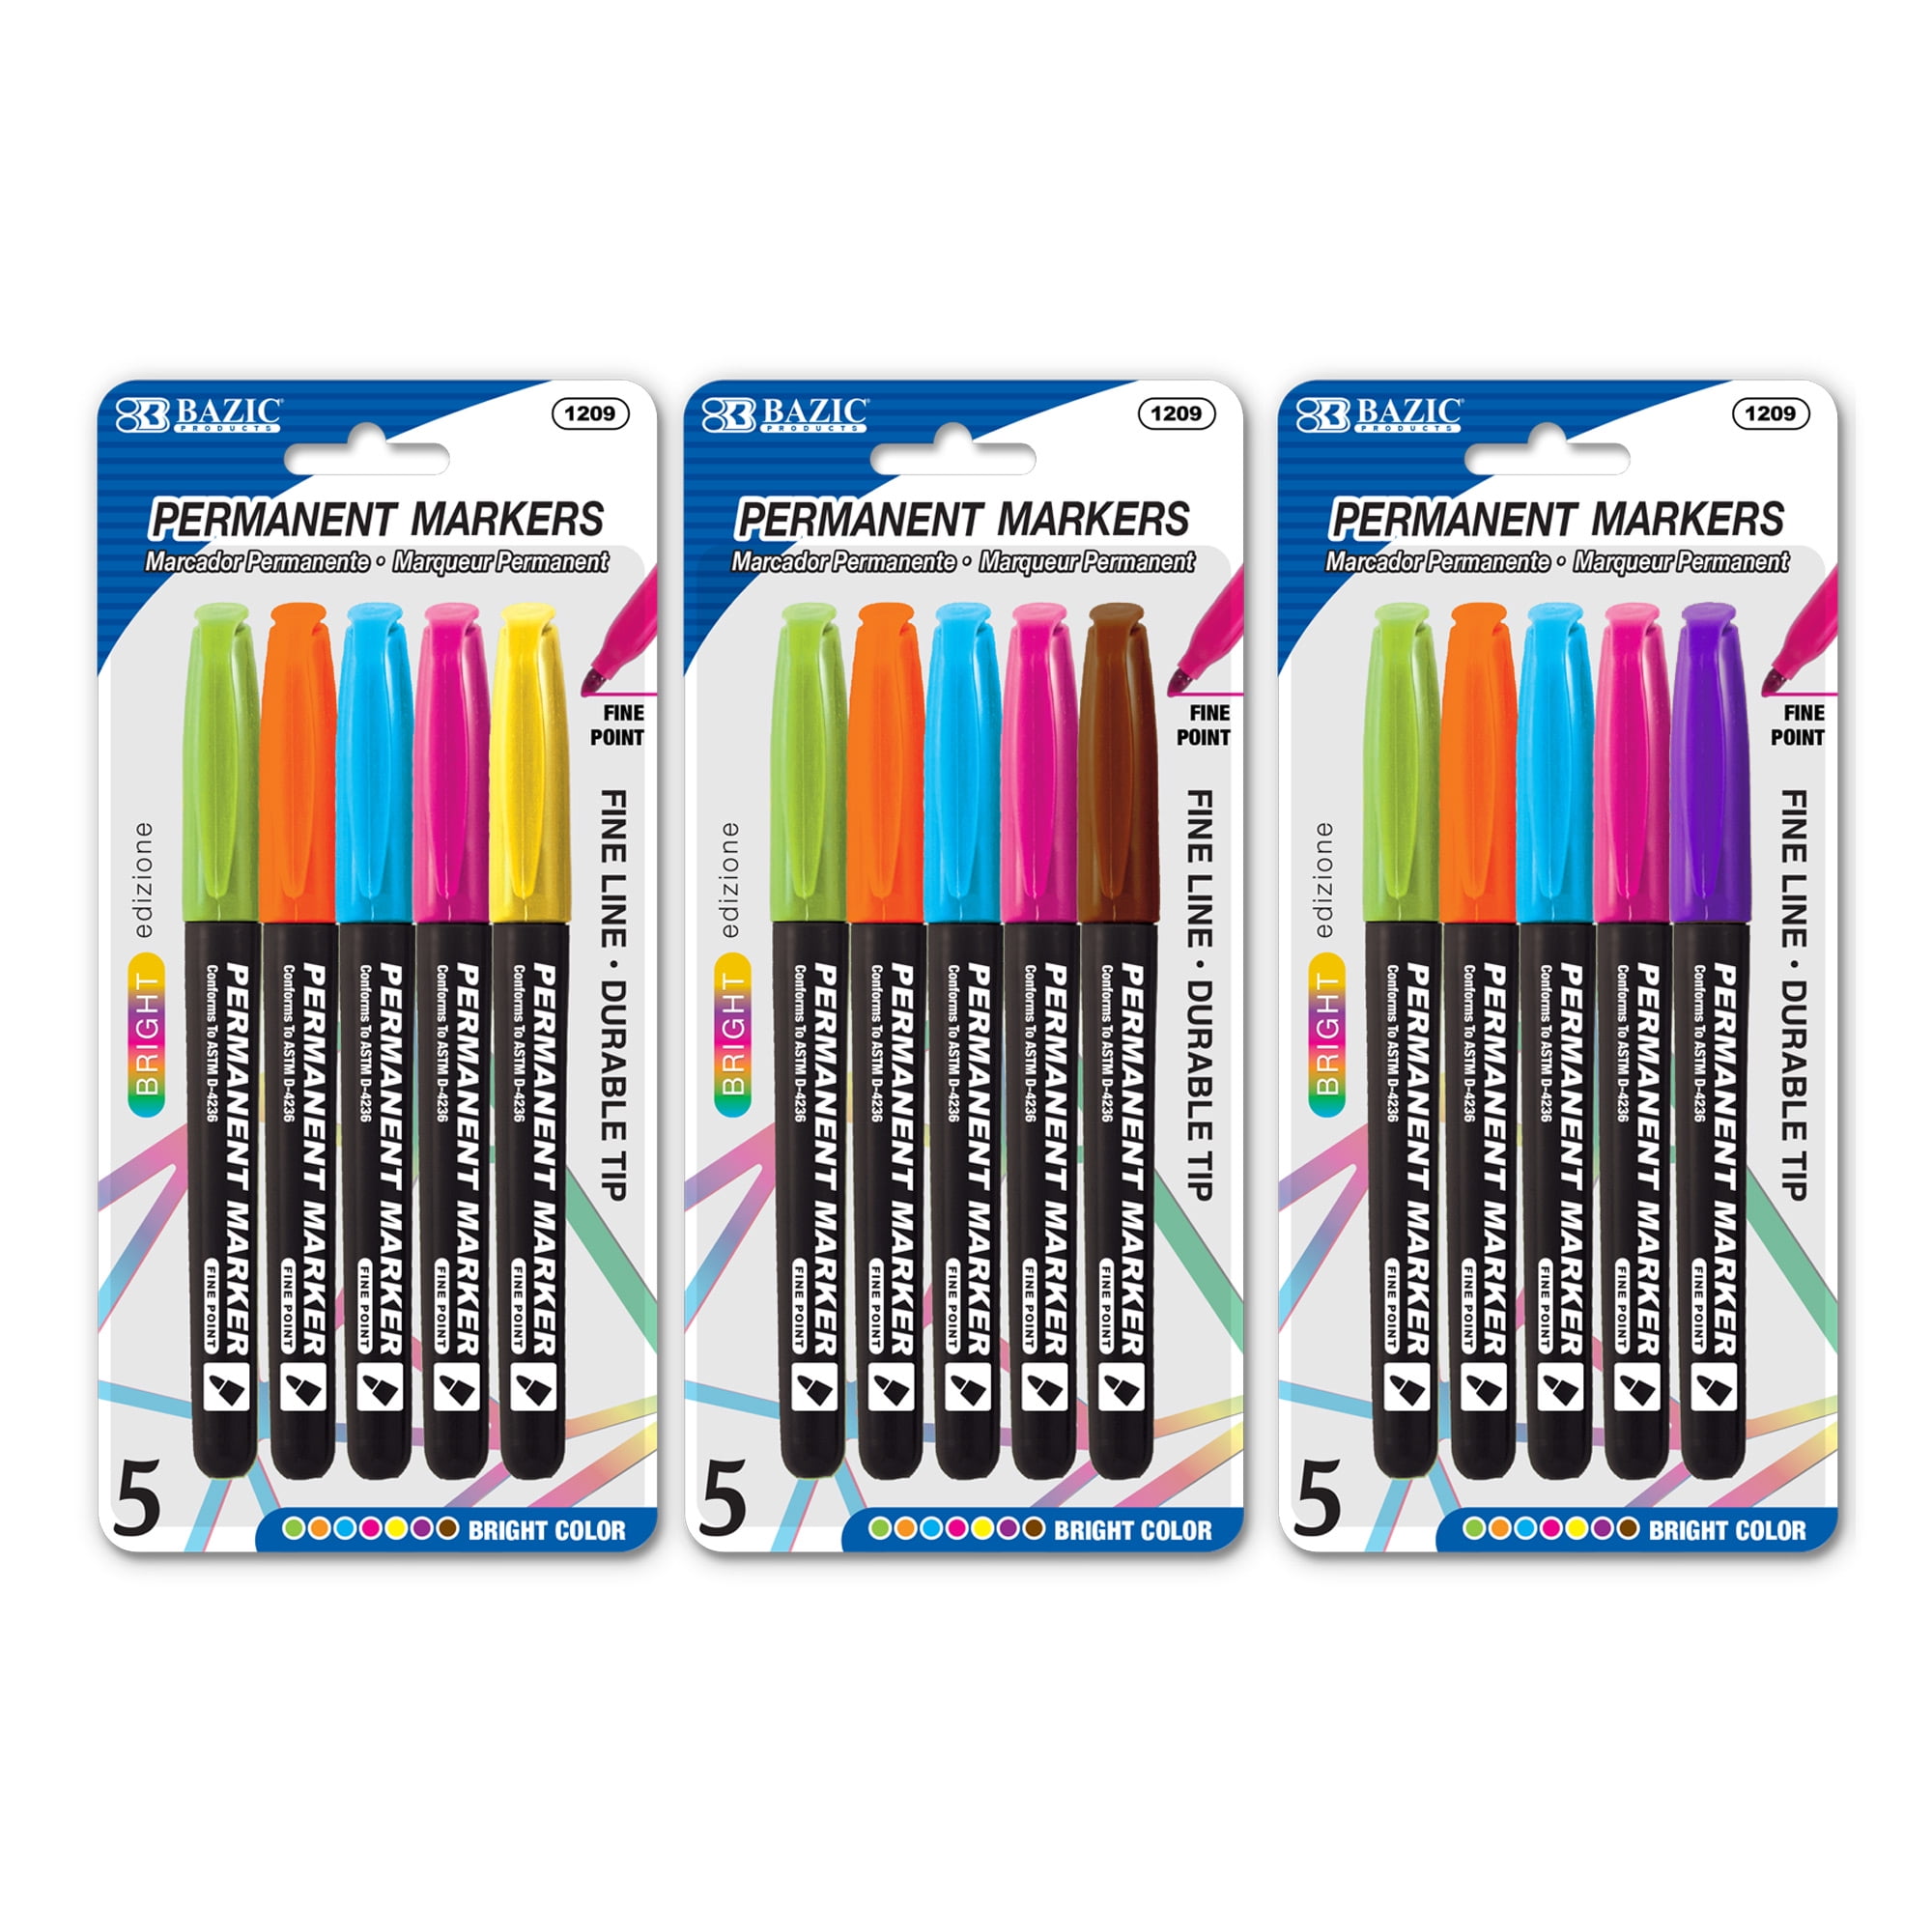 Colored Permanent Markers, Fine Point - Set of 24